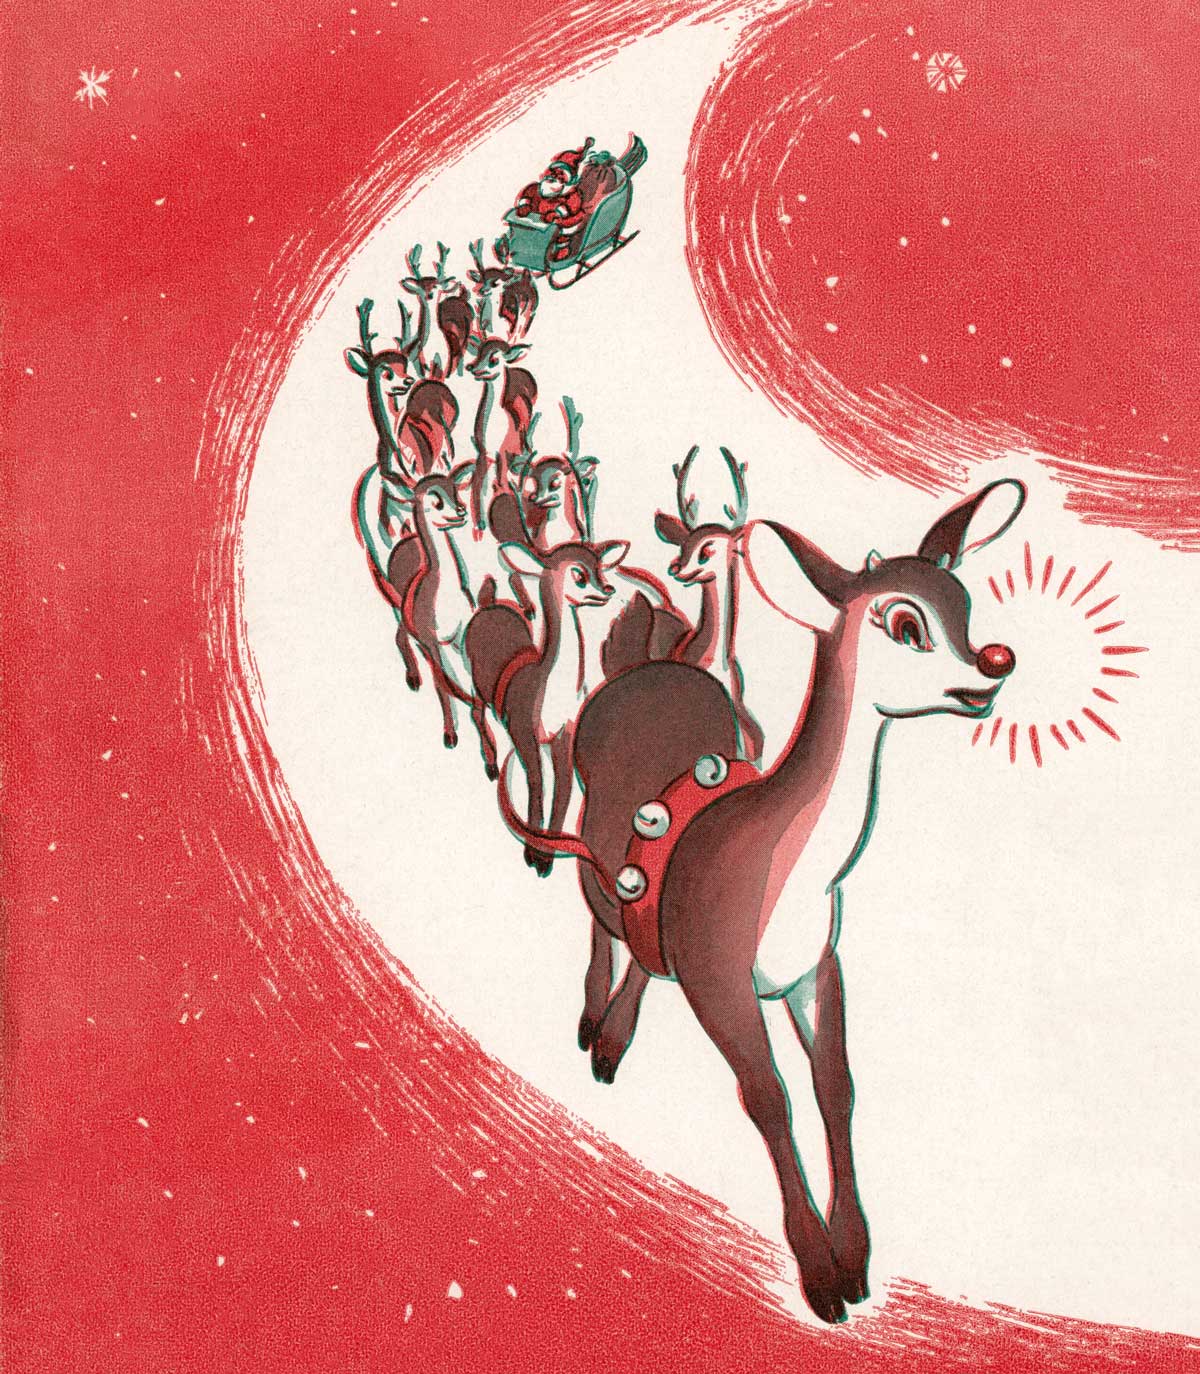 Illustration for Robert  L. May’s Rudolph the Red-Nosed Reindeer, 1949 © Getty Images.